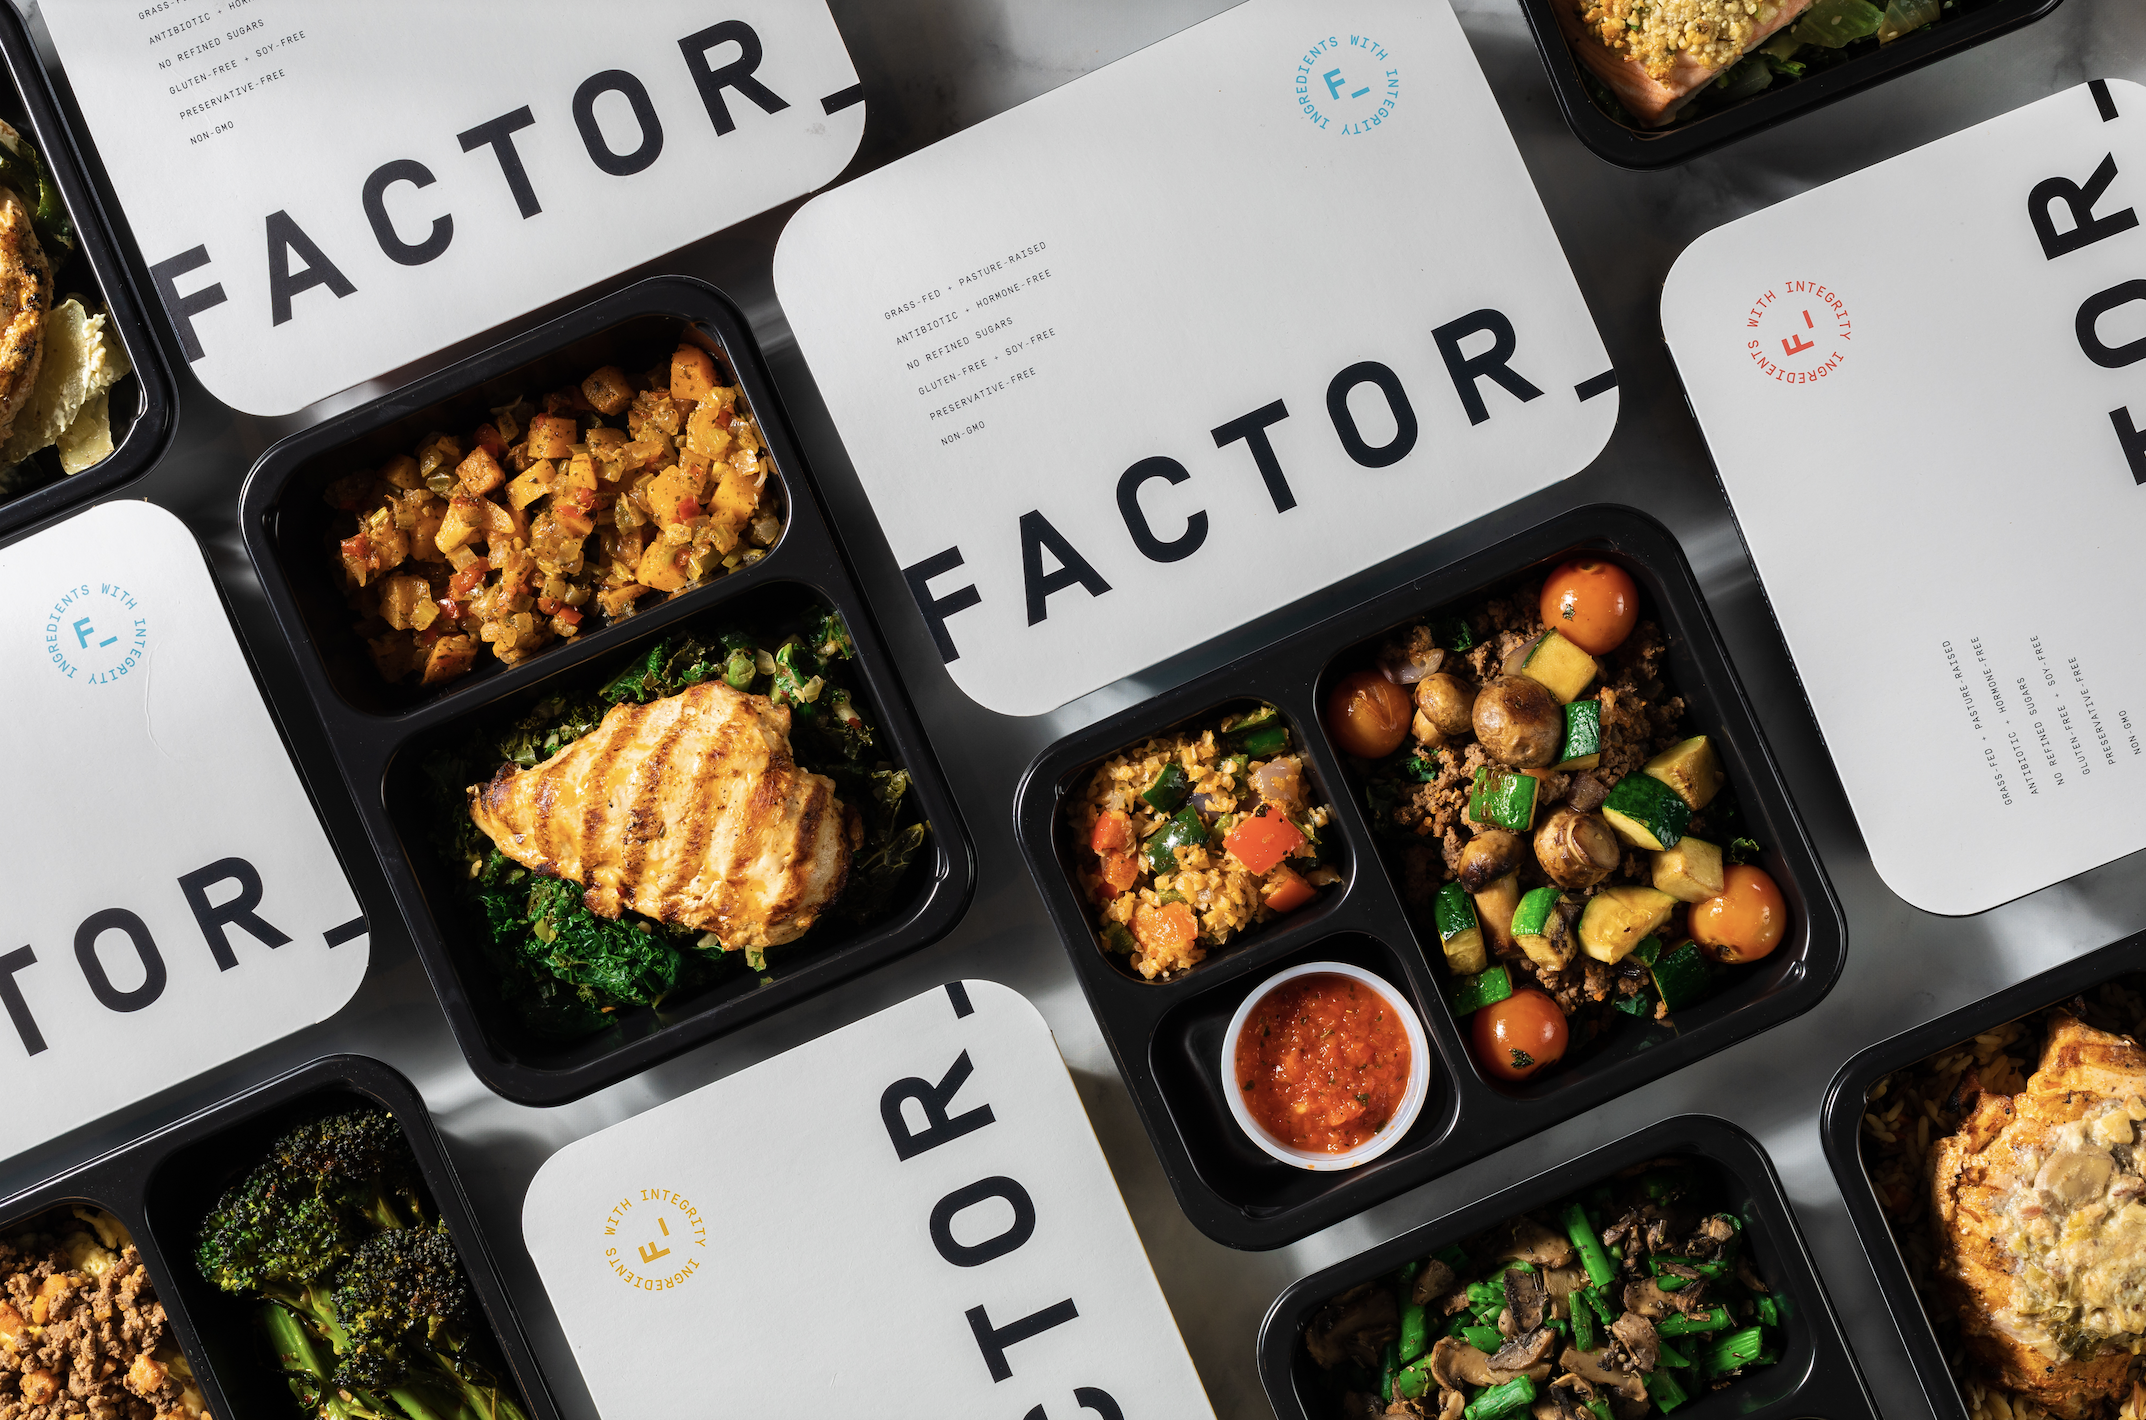 11 Best Healthy Meal Delivery Services of 2022